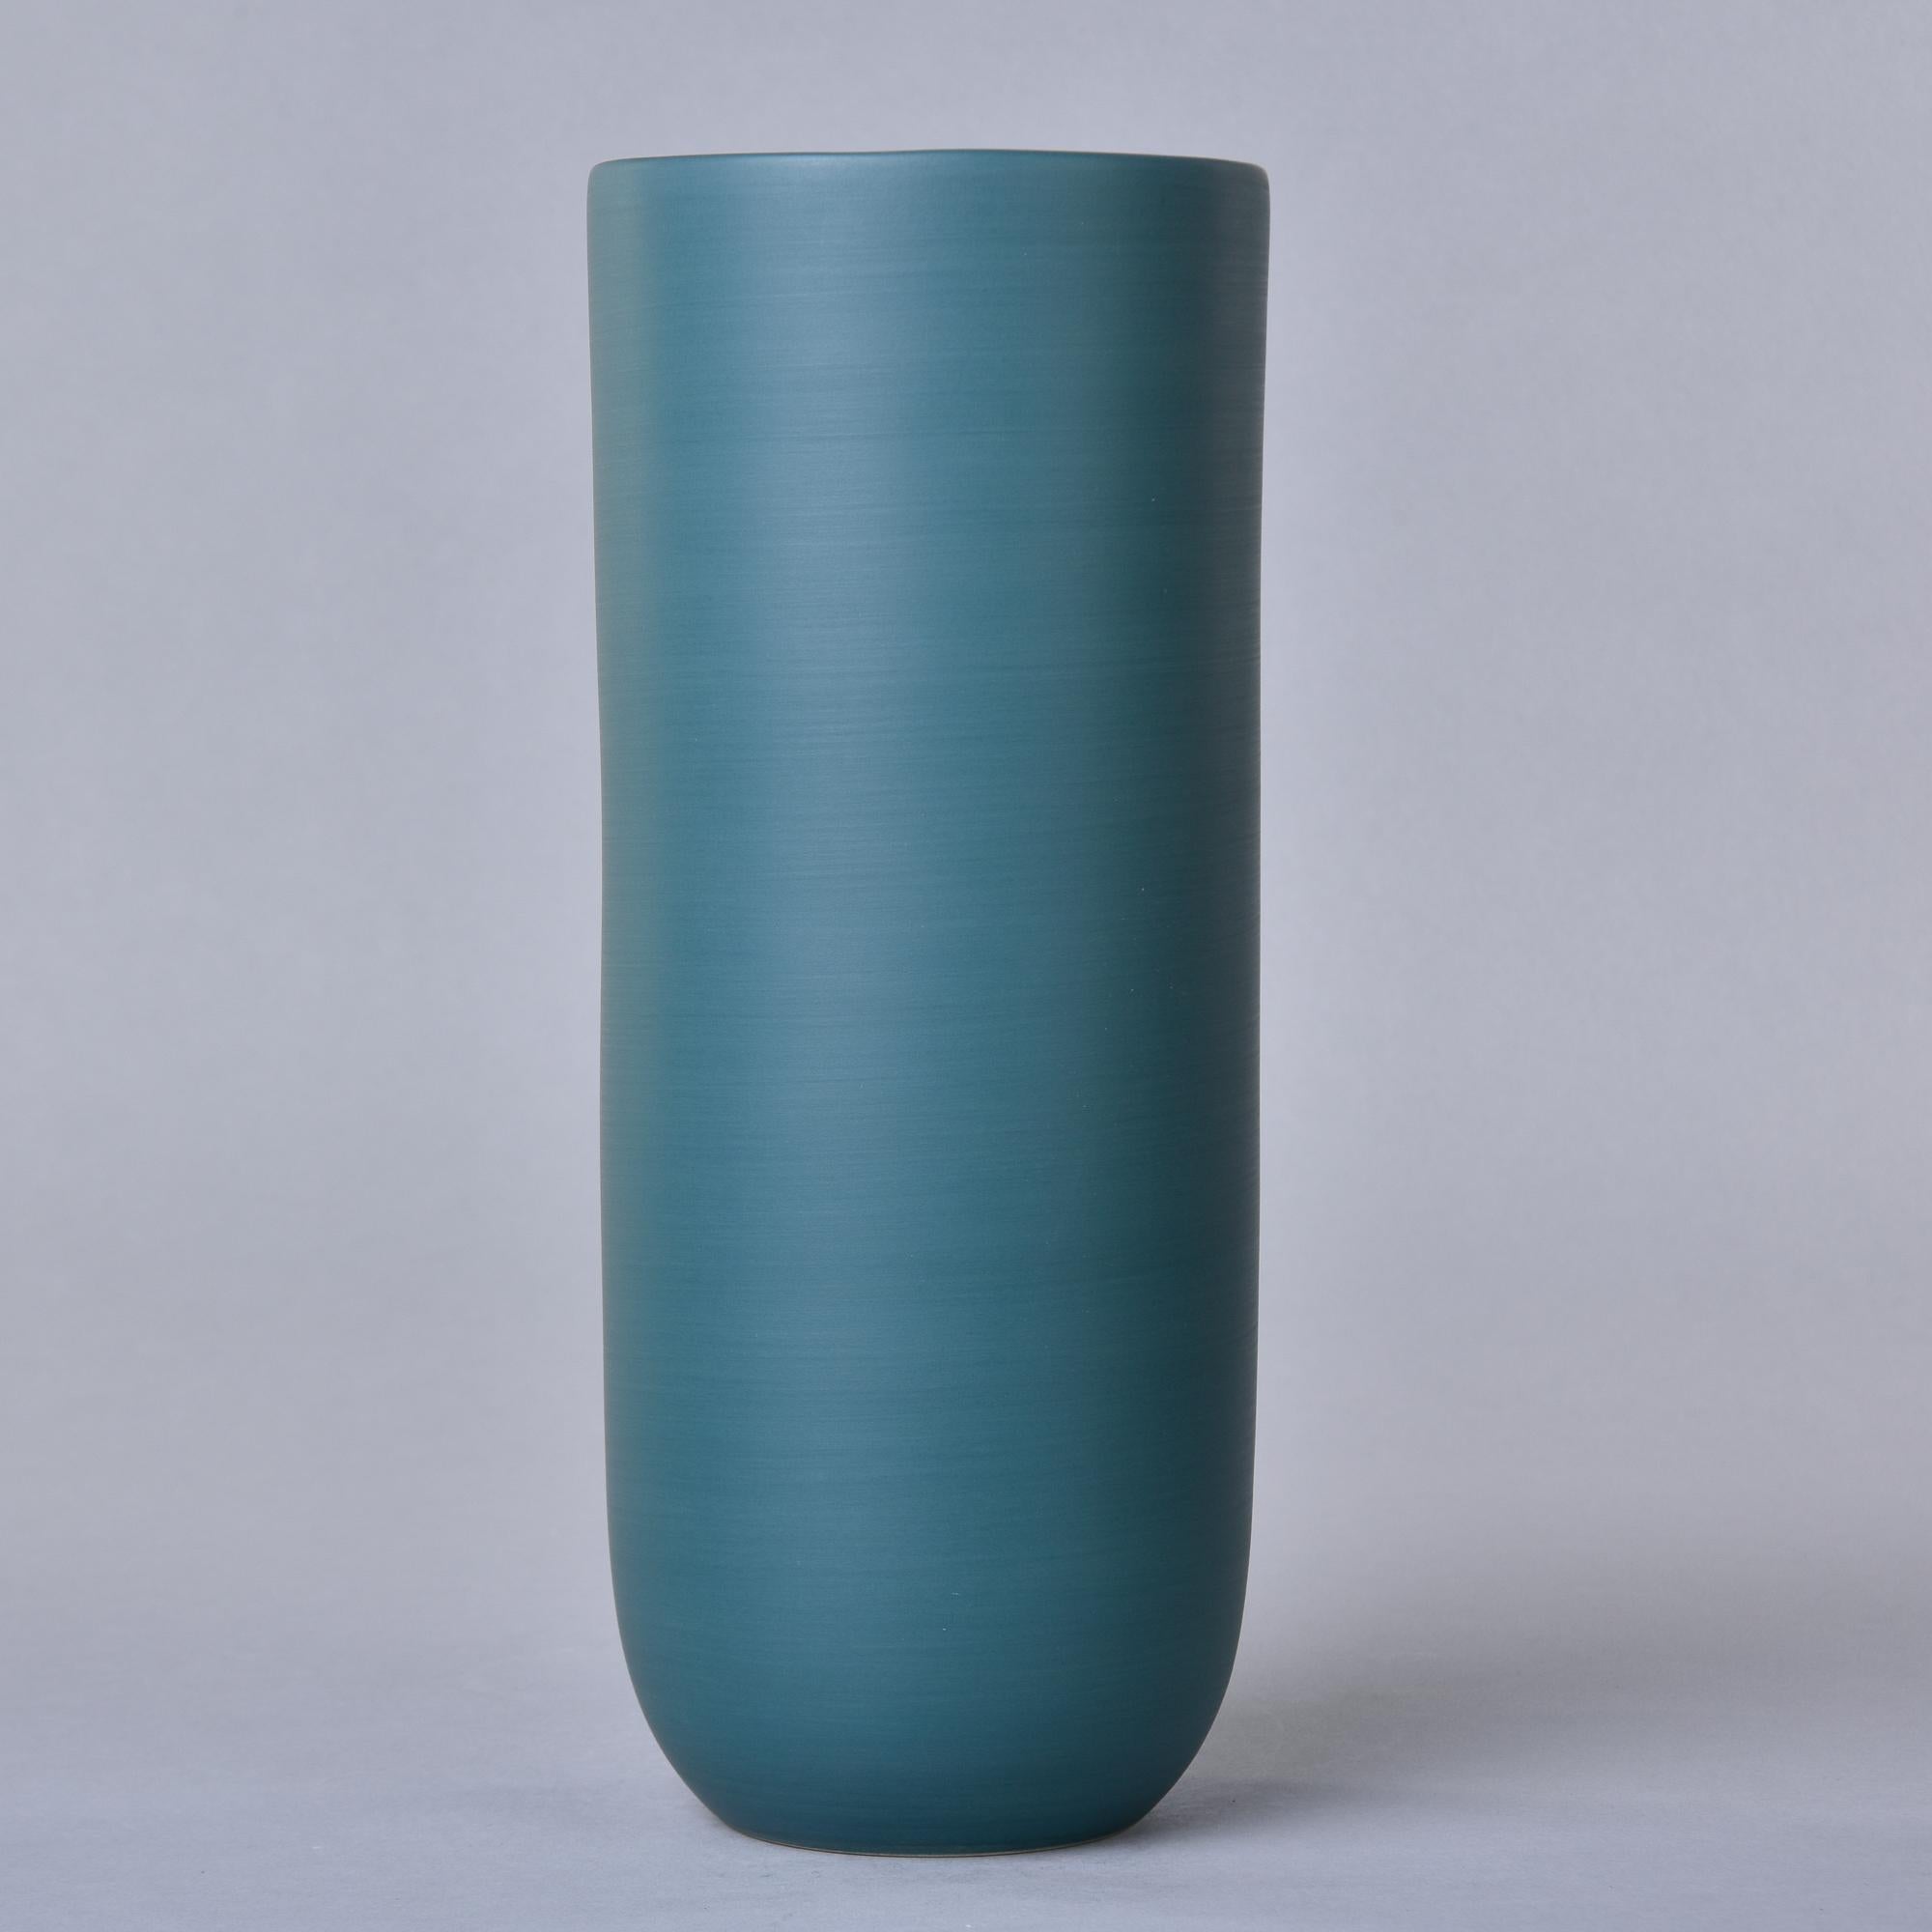 New and made in Italy by Rina Menardi, this tall Canna 1 vase stands over 12” tall. The vessel has a saturated teal green glaze and a matte black interior glaze. Signed on underside of base by the maker. 

We have an extensive inventory of new